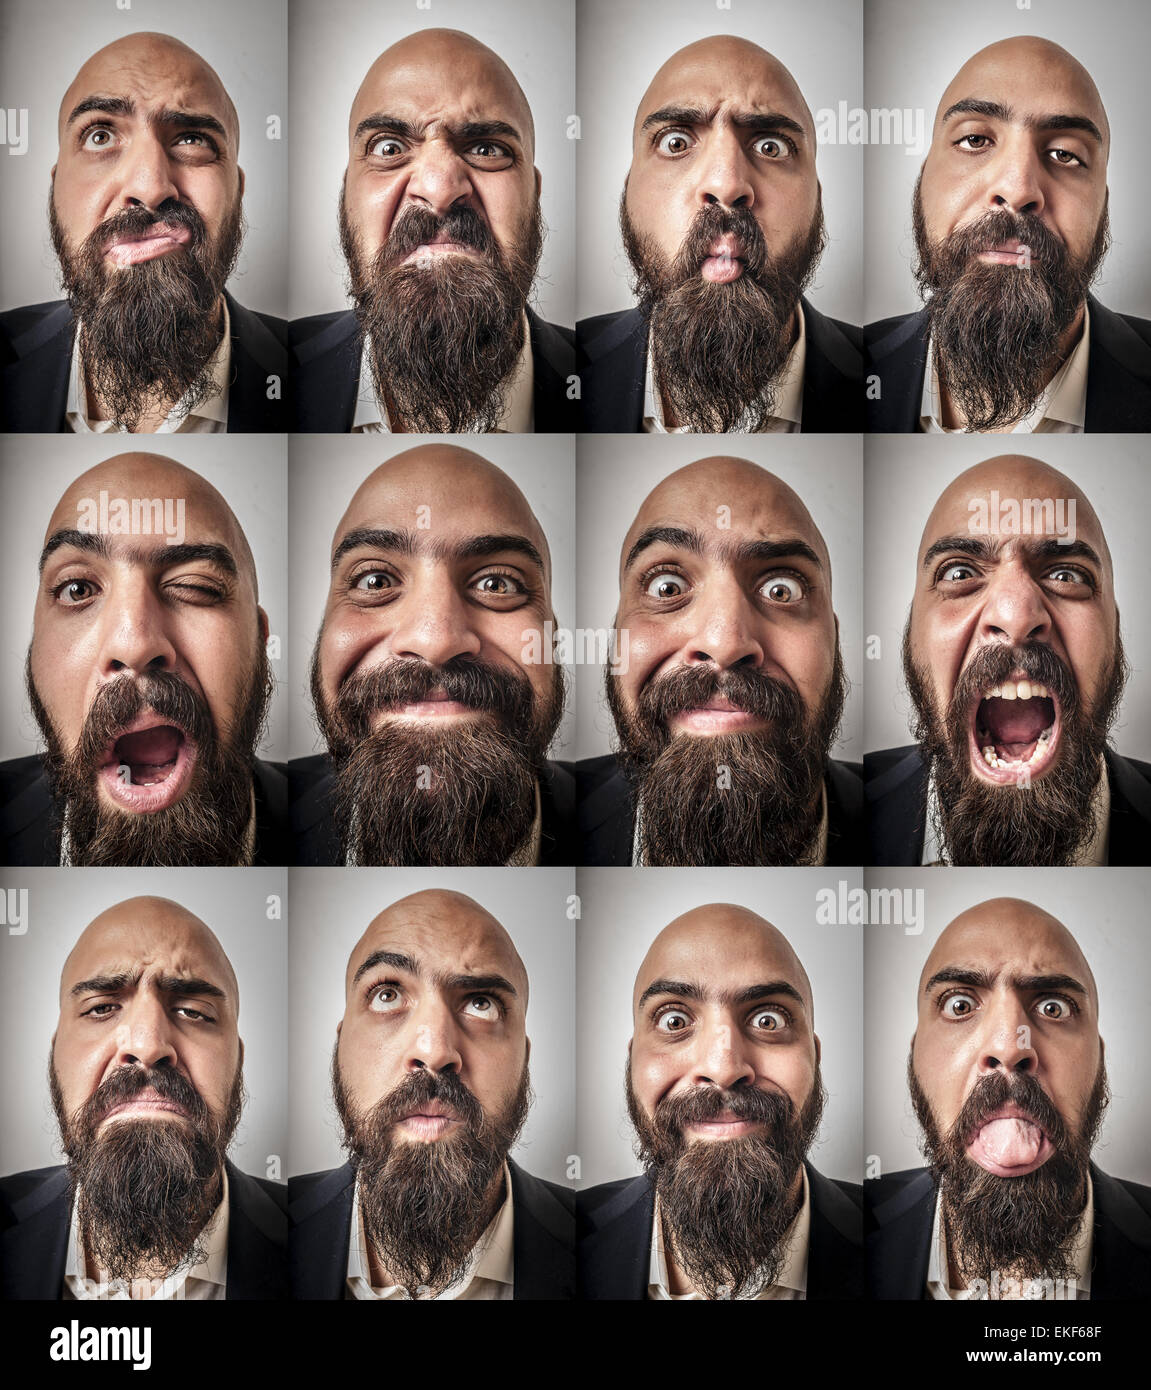 set of bearded man expressions Stock Photo